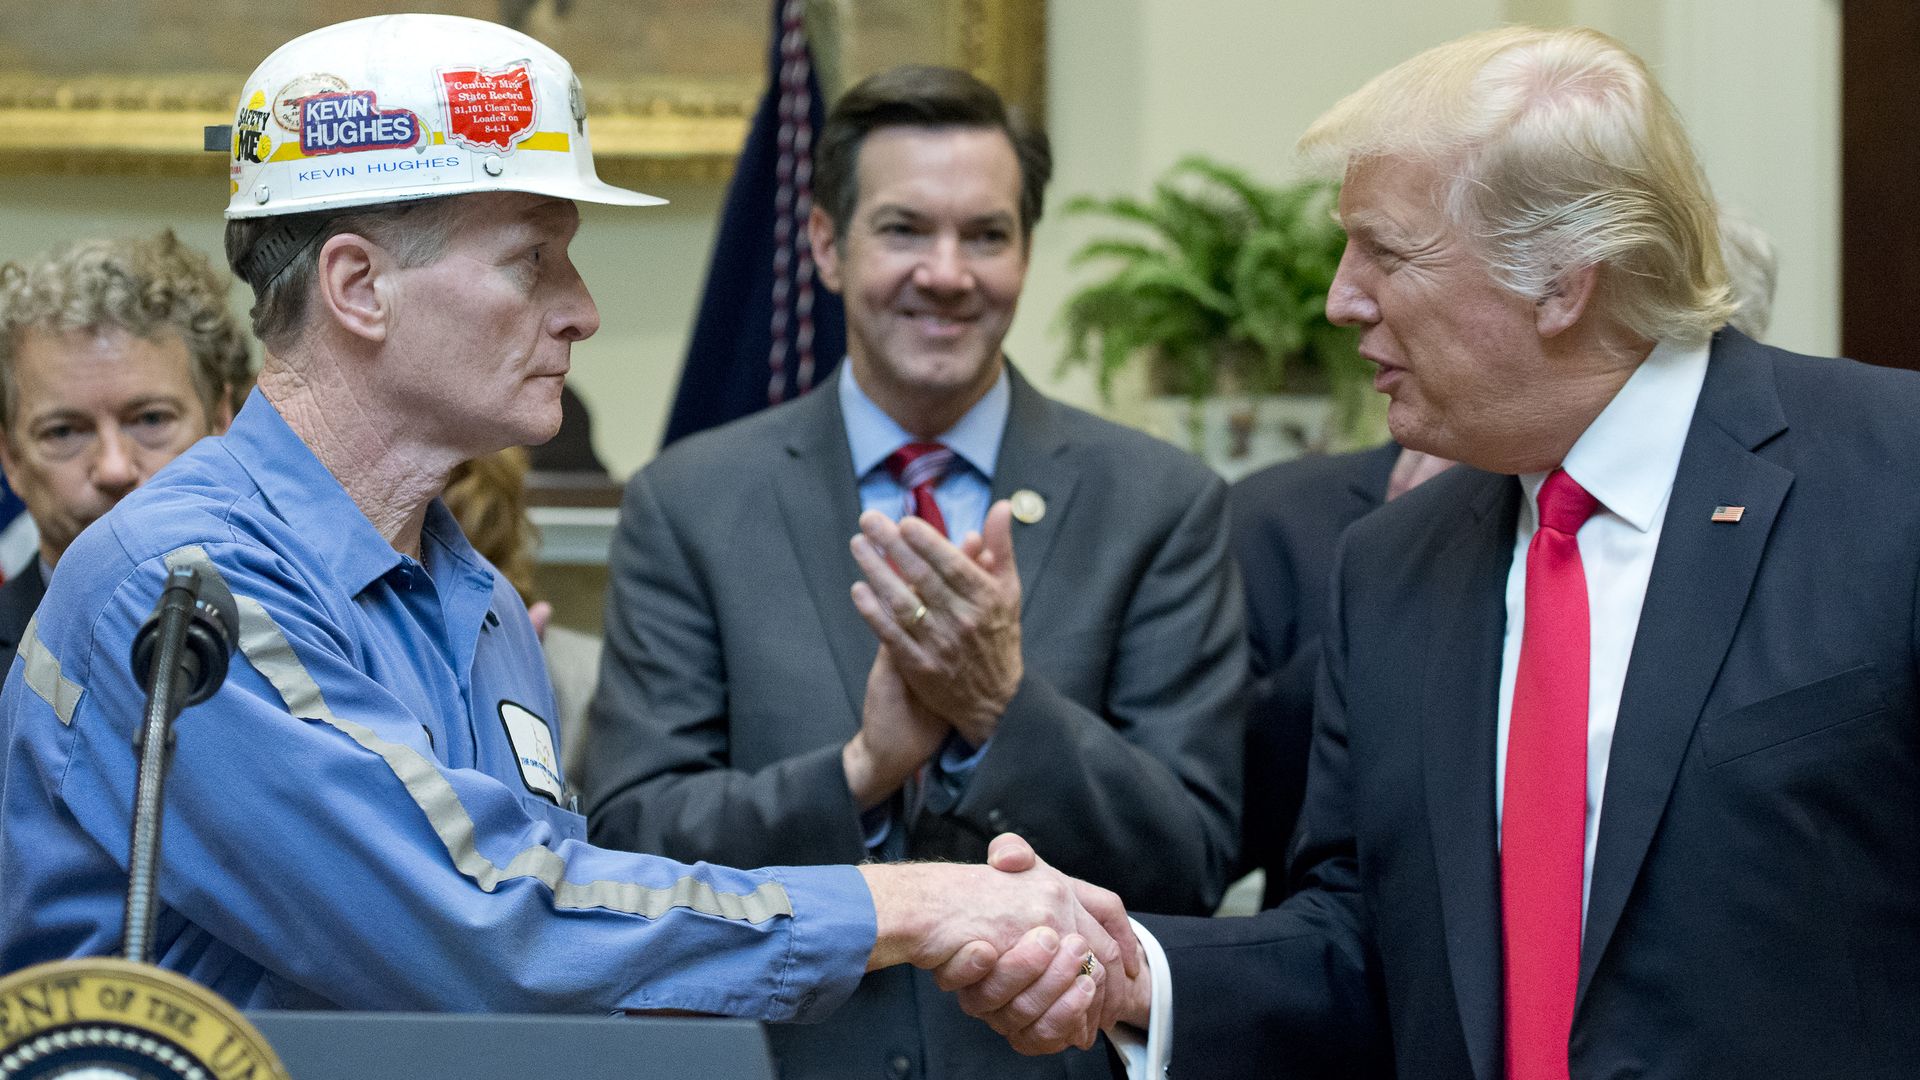 Trump shaking hands with a coal miner